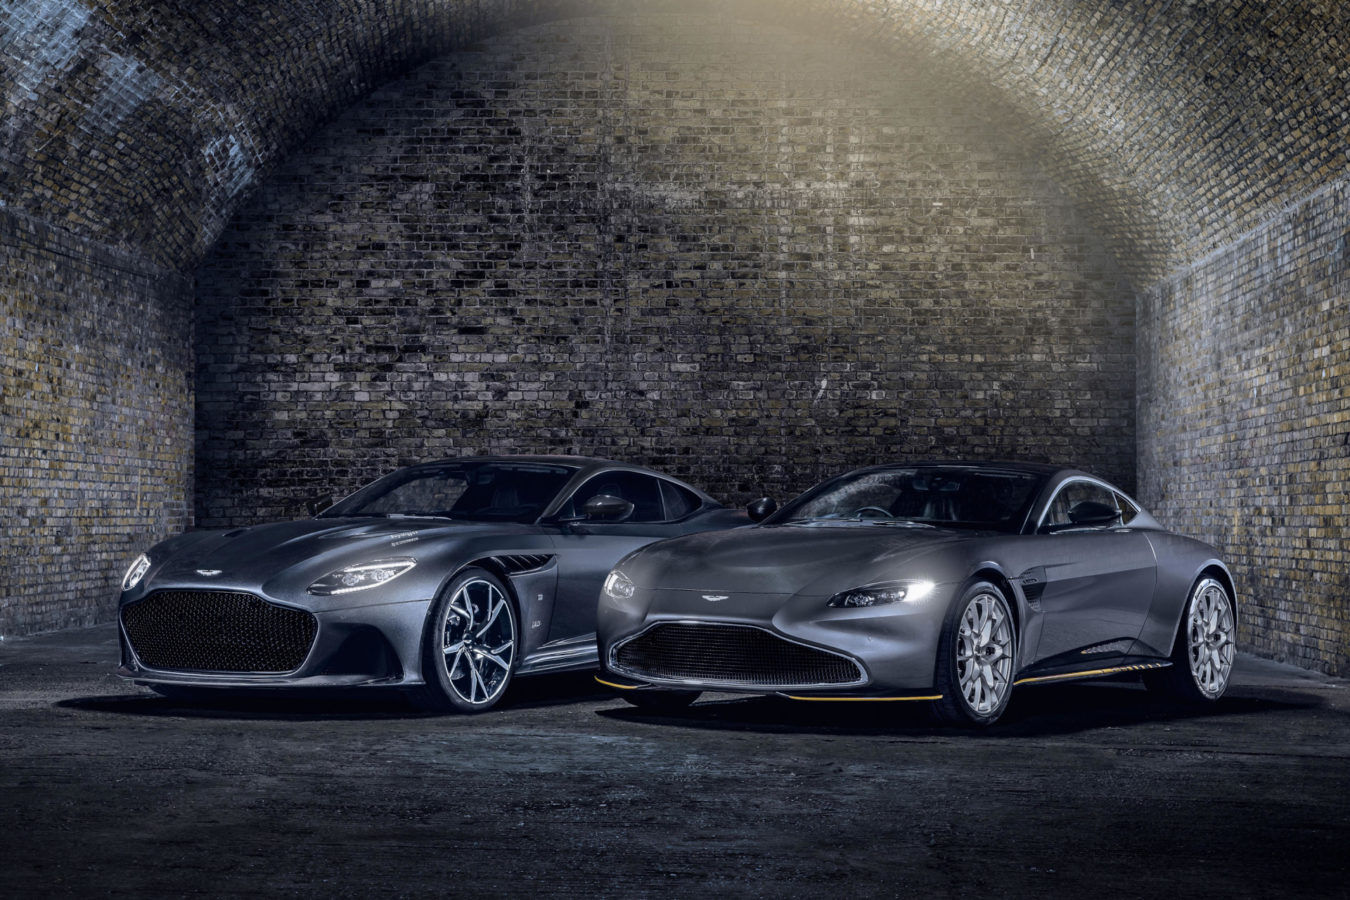 Aston Martin to launch two new limited-edition cars inspired by the world of James Bond